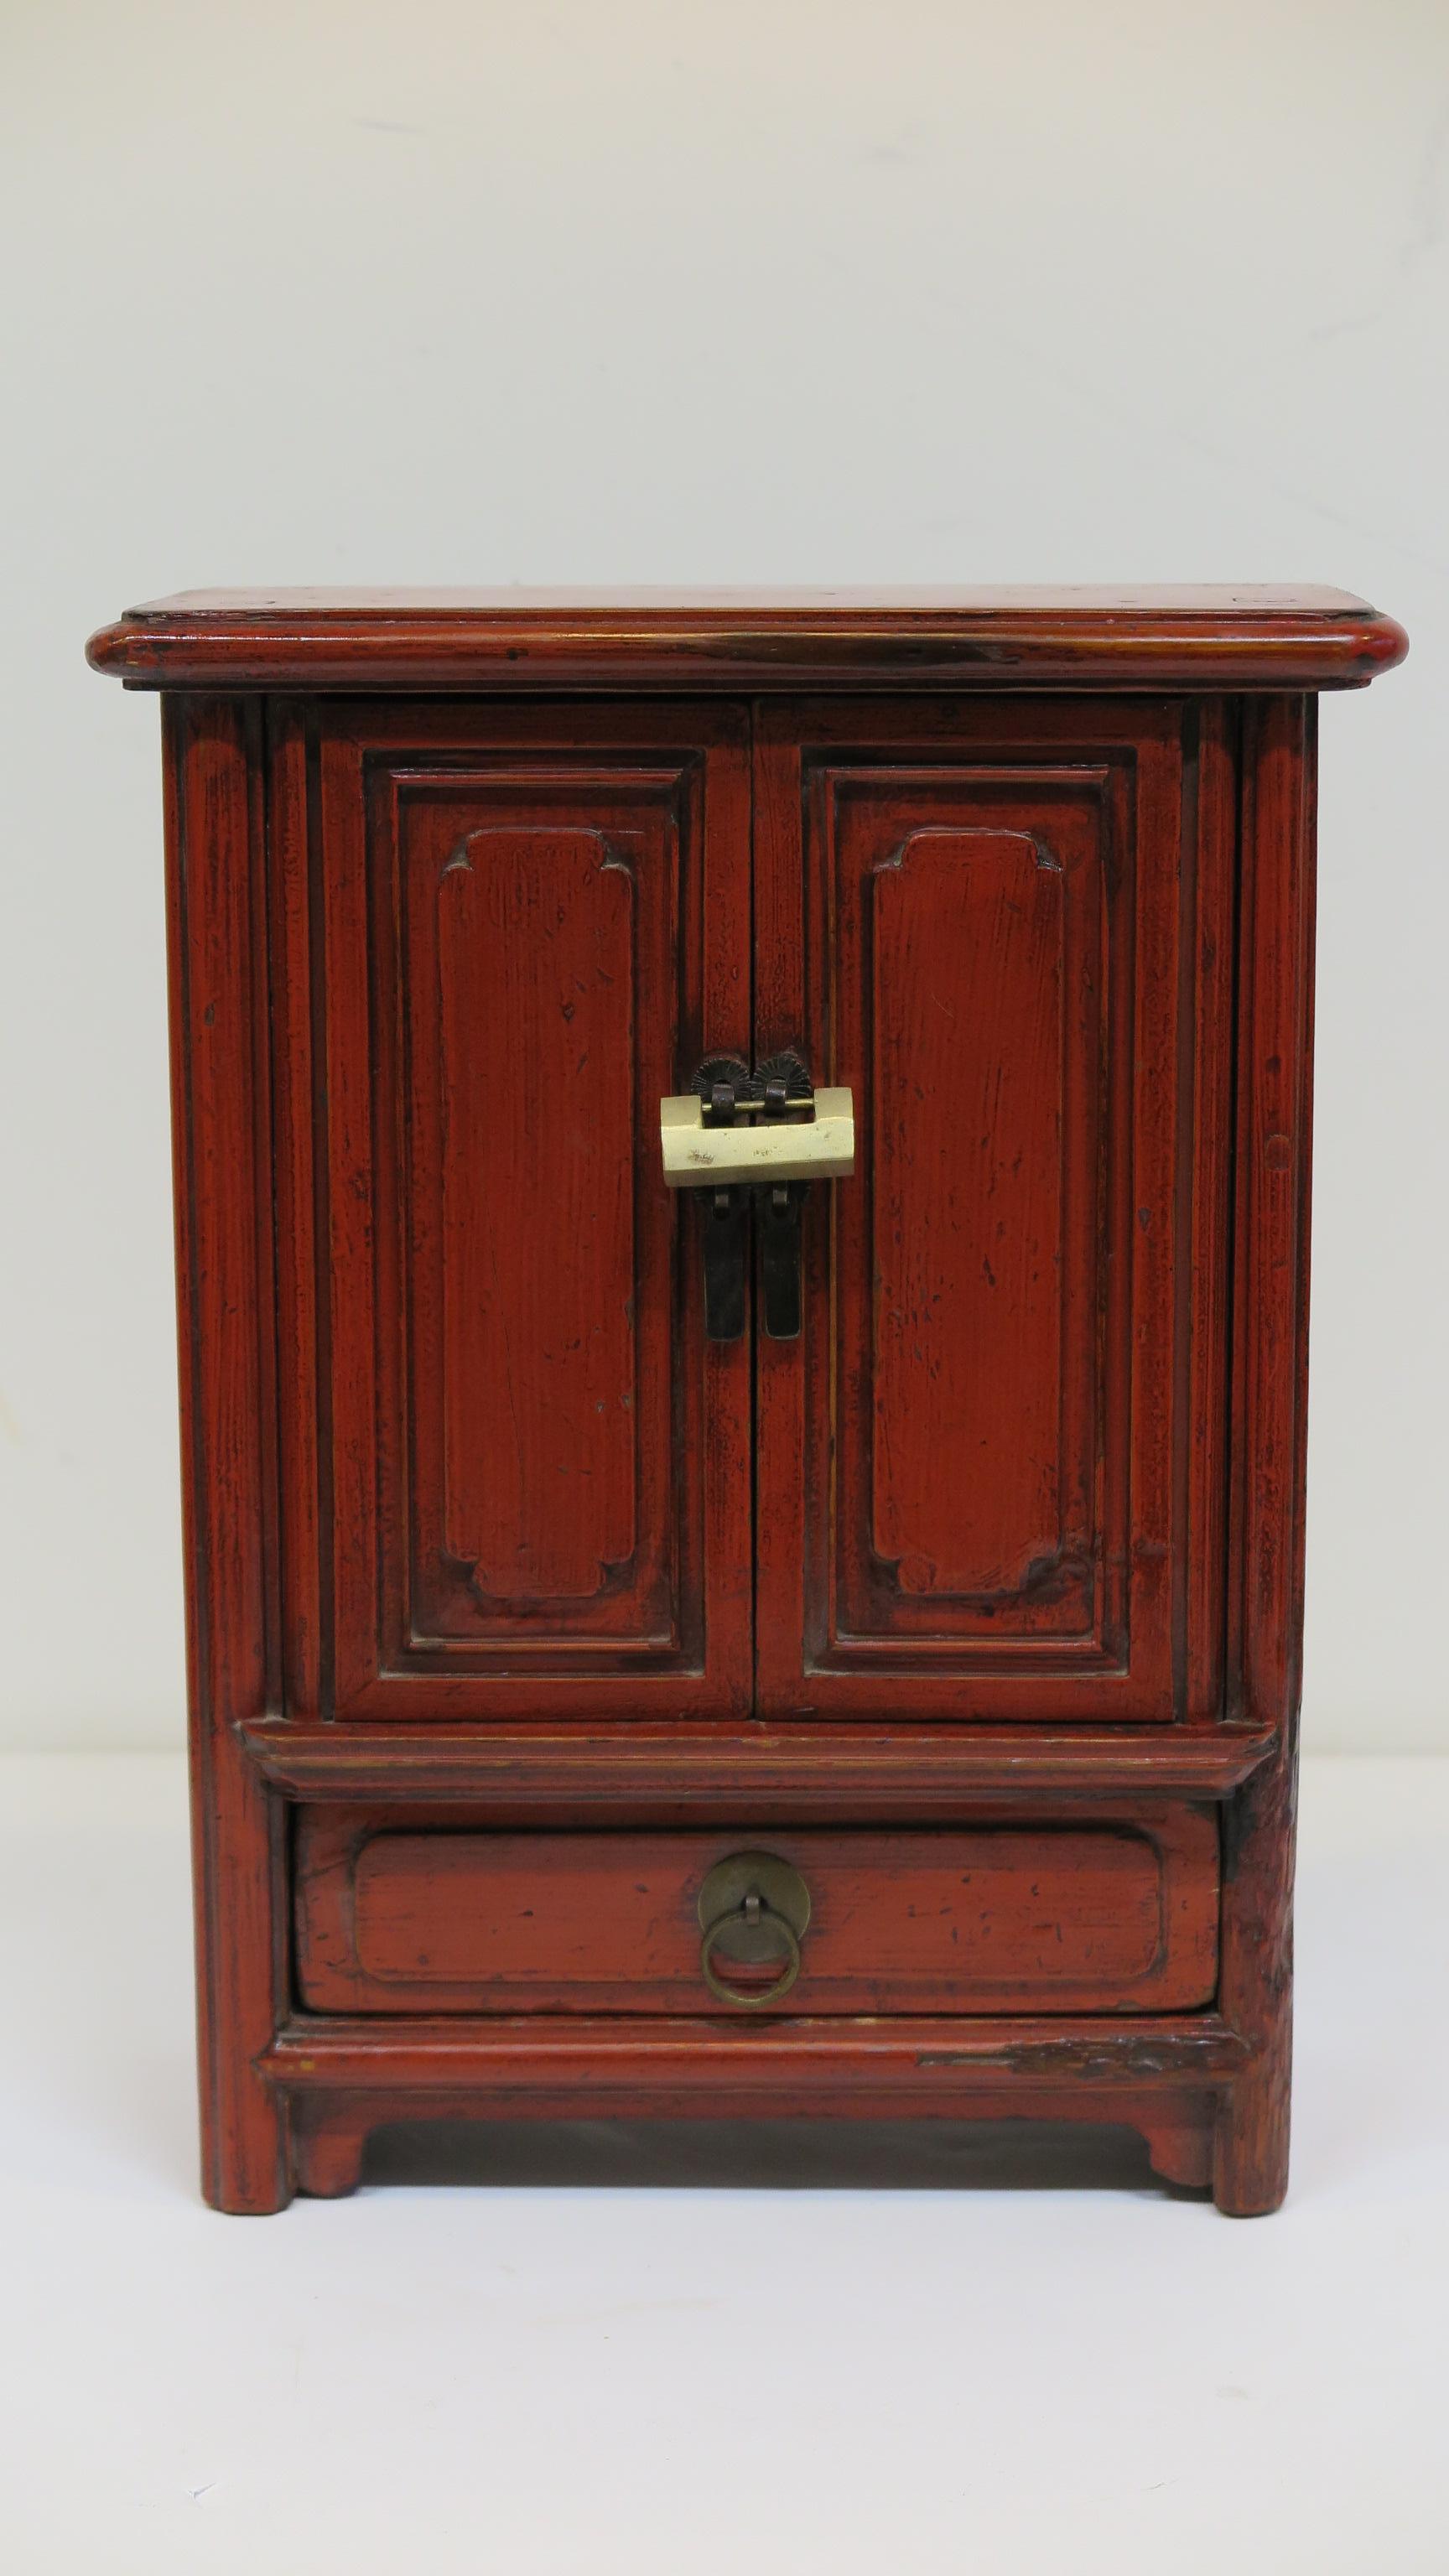 Miniature antique Chinese red lacquer panel cabinet Qing dynasty. Miniature Chinese panel cabinet with traditional brass hanging lock. Carved panel doors also having the left side of the cabinet with panel and the right side panel has wear pictured.